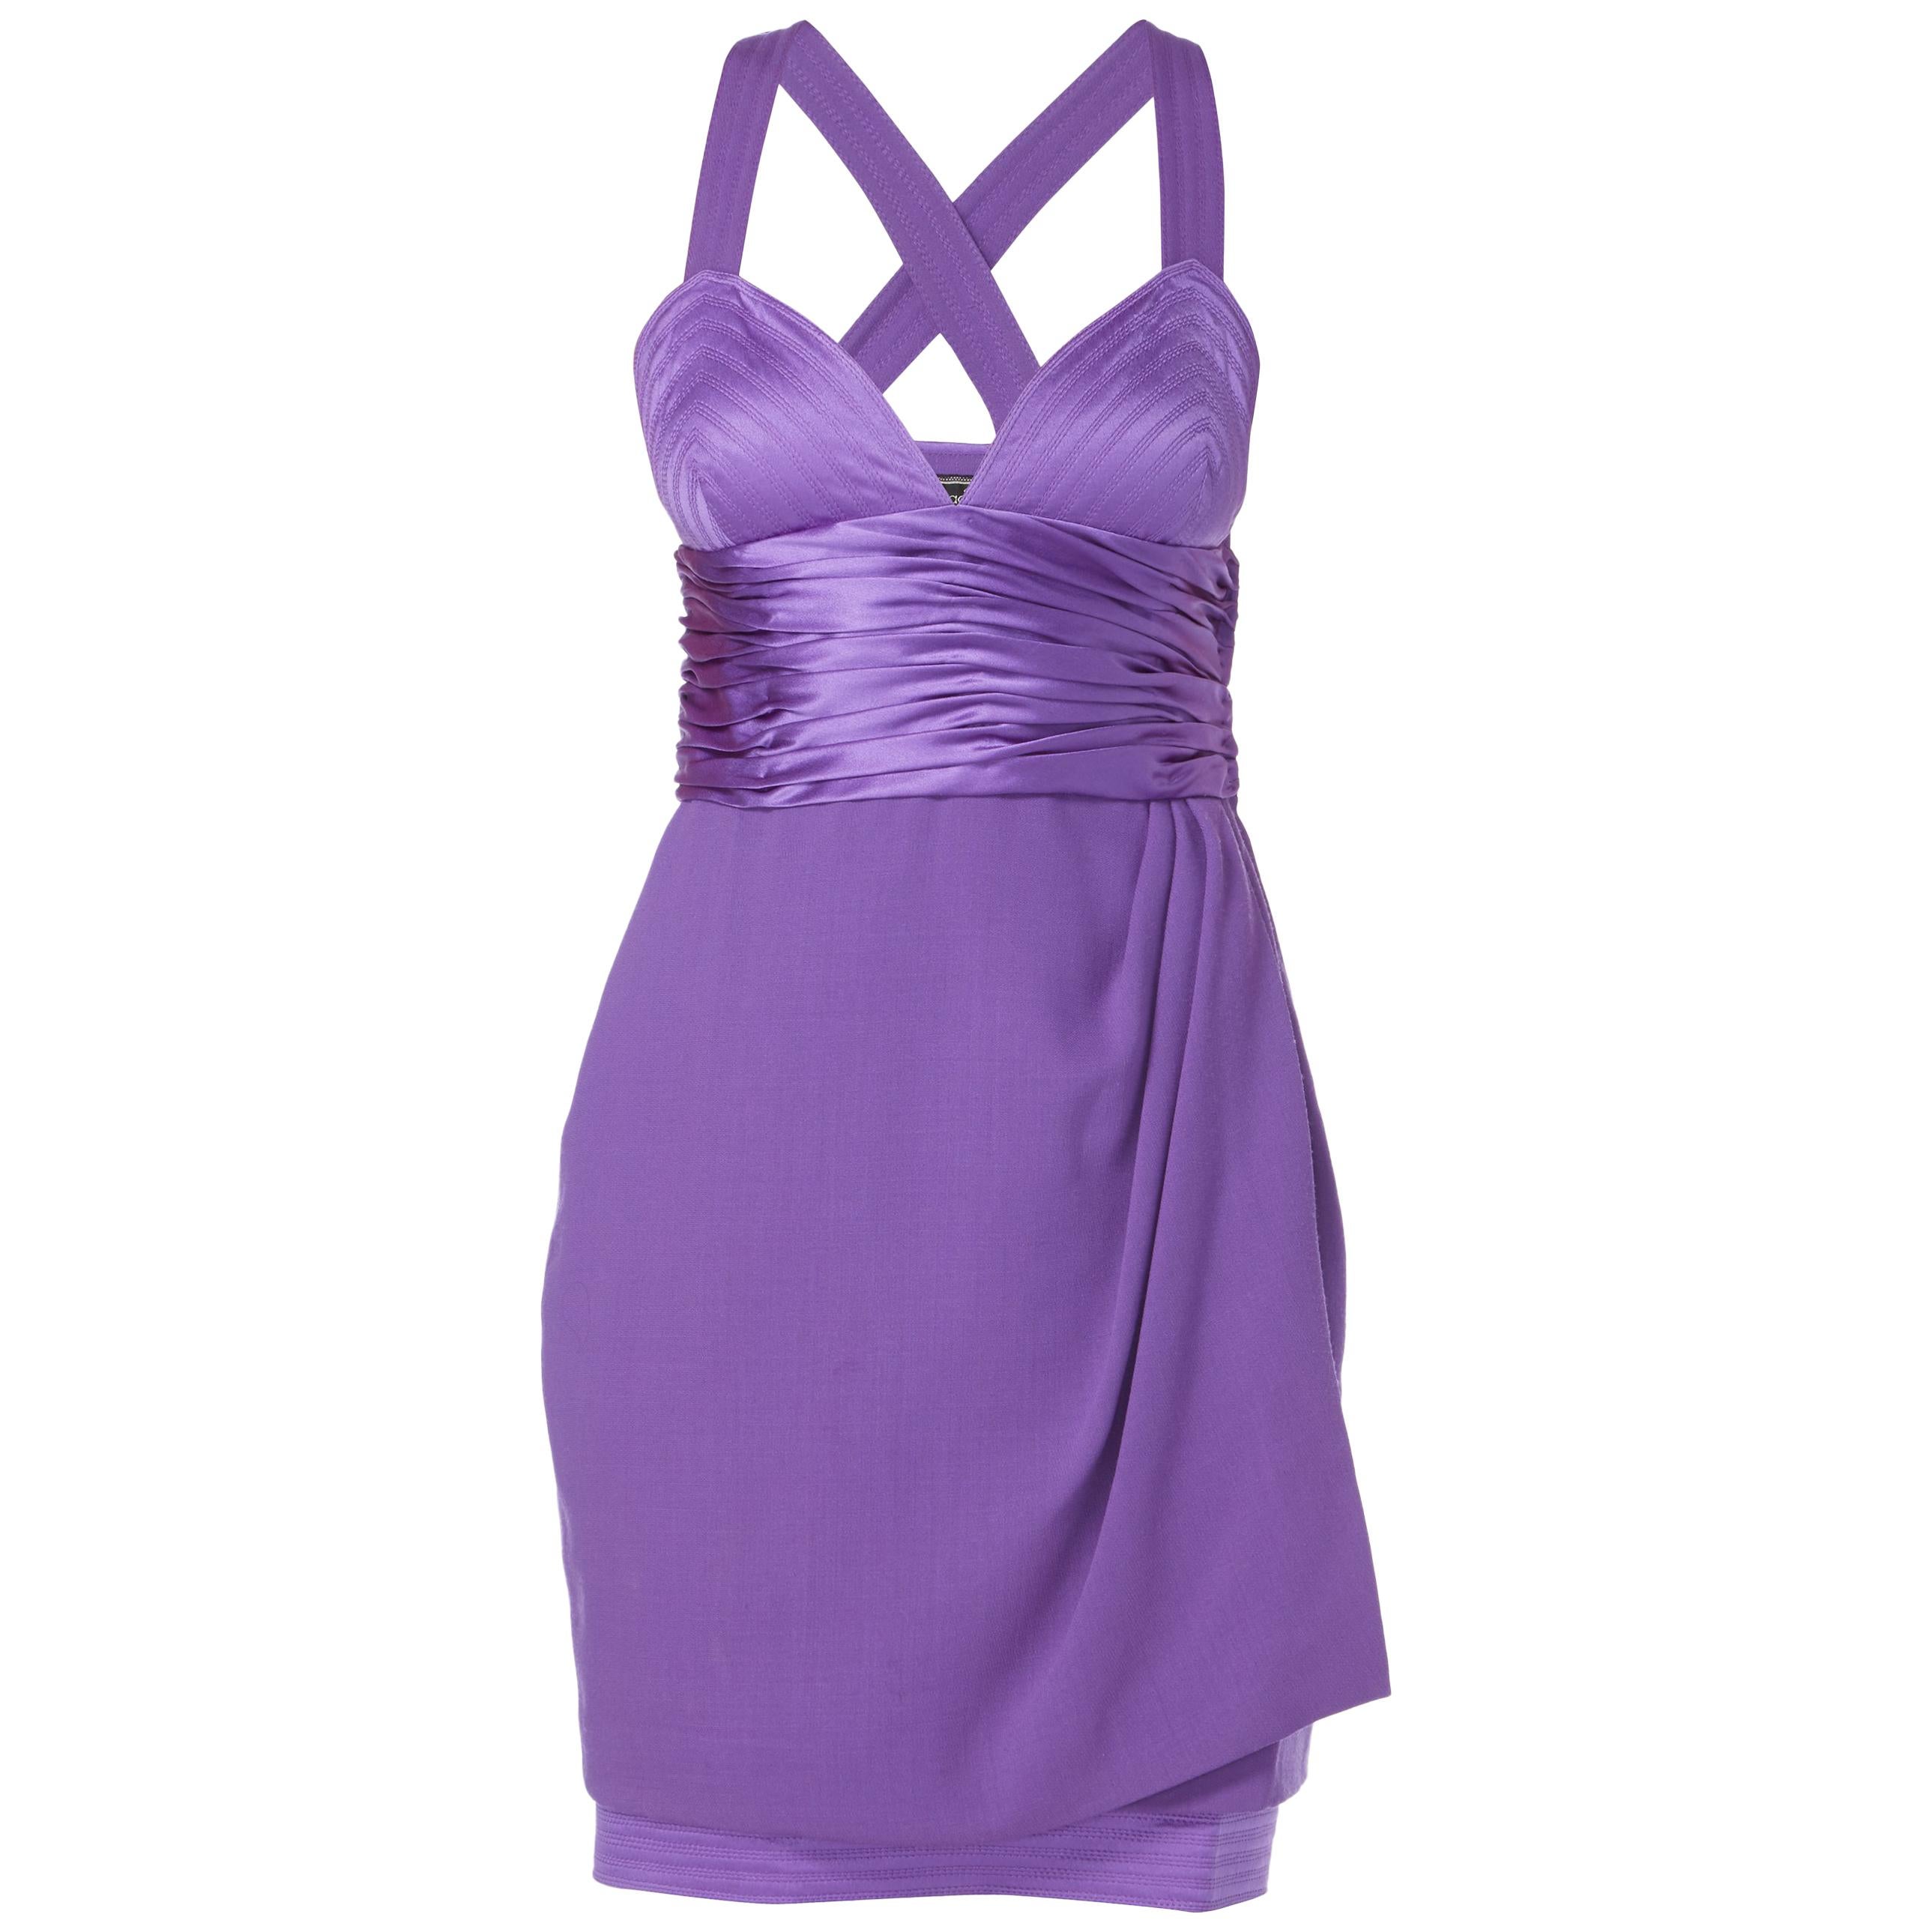 Gianni Versace Couture, purple silk cocktail dress, Circa 1980 For Sale